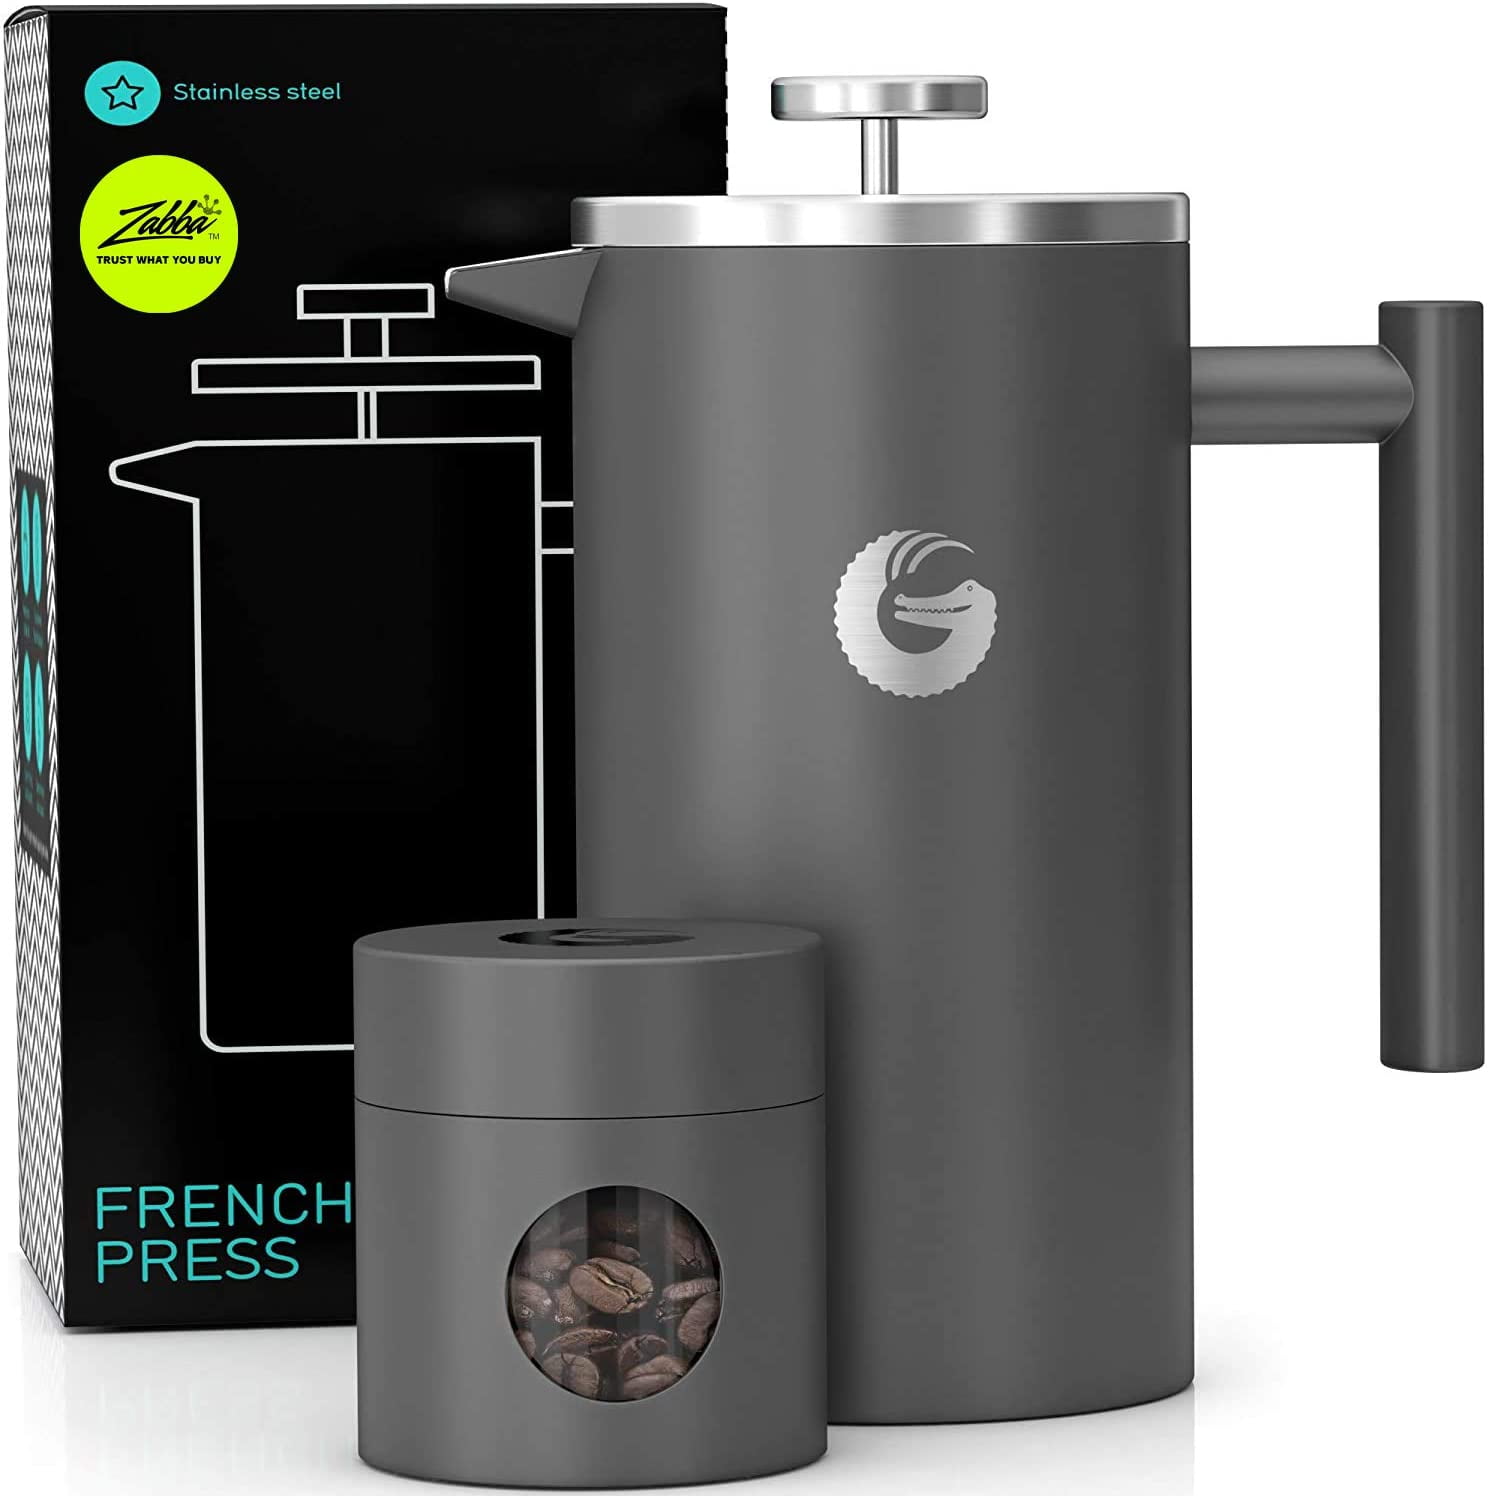 Prime Day Deal: Coffee Gator Cold Brew Coffee Maker